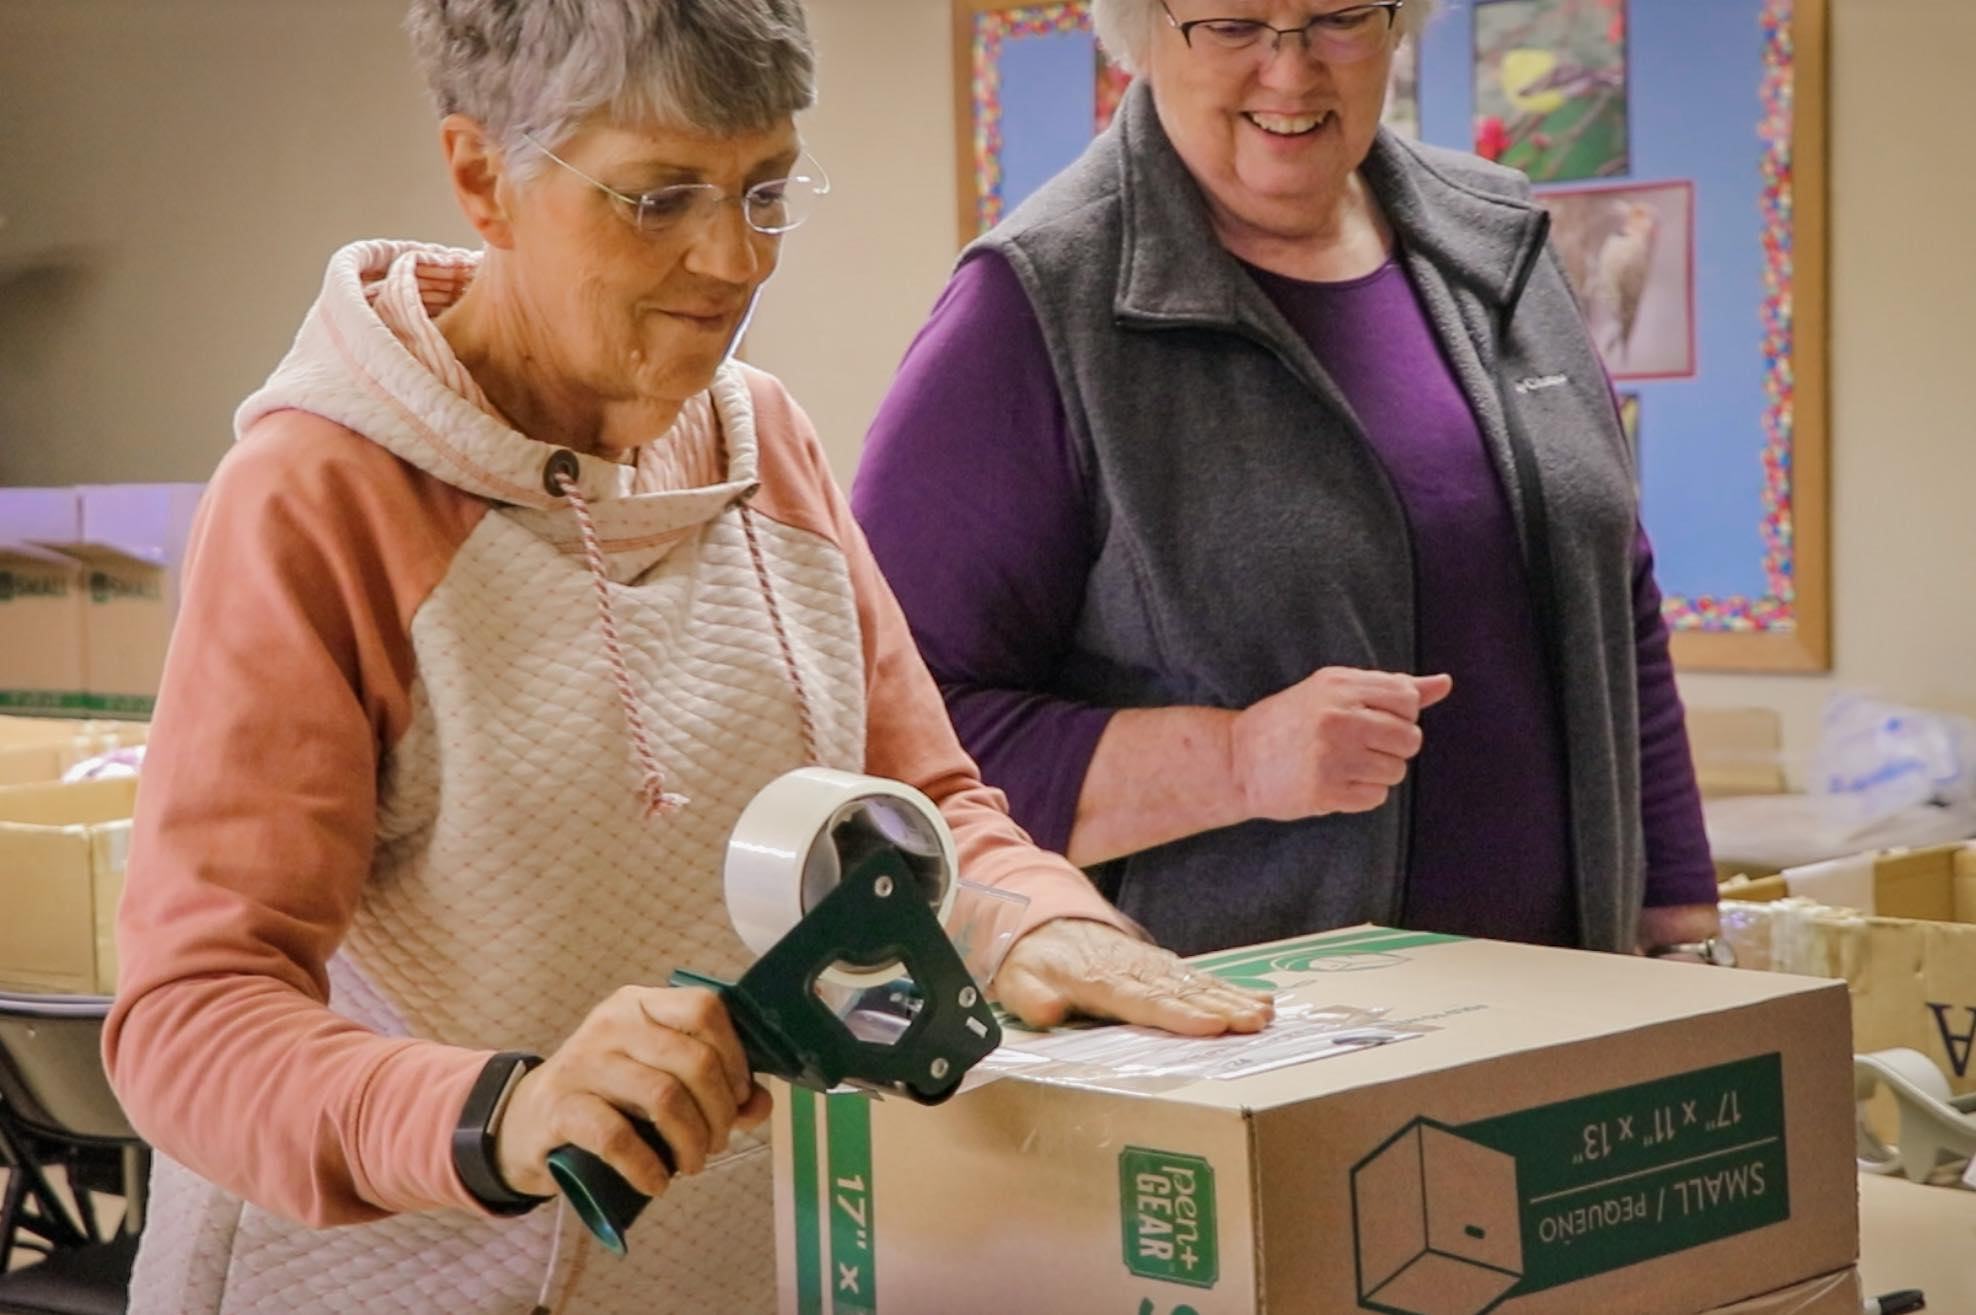 Volunteers sorted about 1,300 items and packaged the goods in 94 boxes, labeled with the contents. This brought the total to 189 boxes and 3,300 items collected in just one month. 